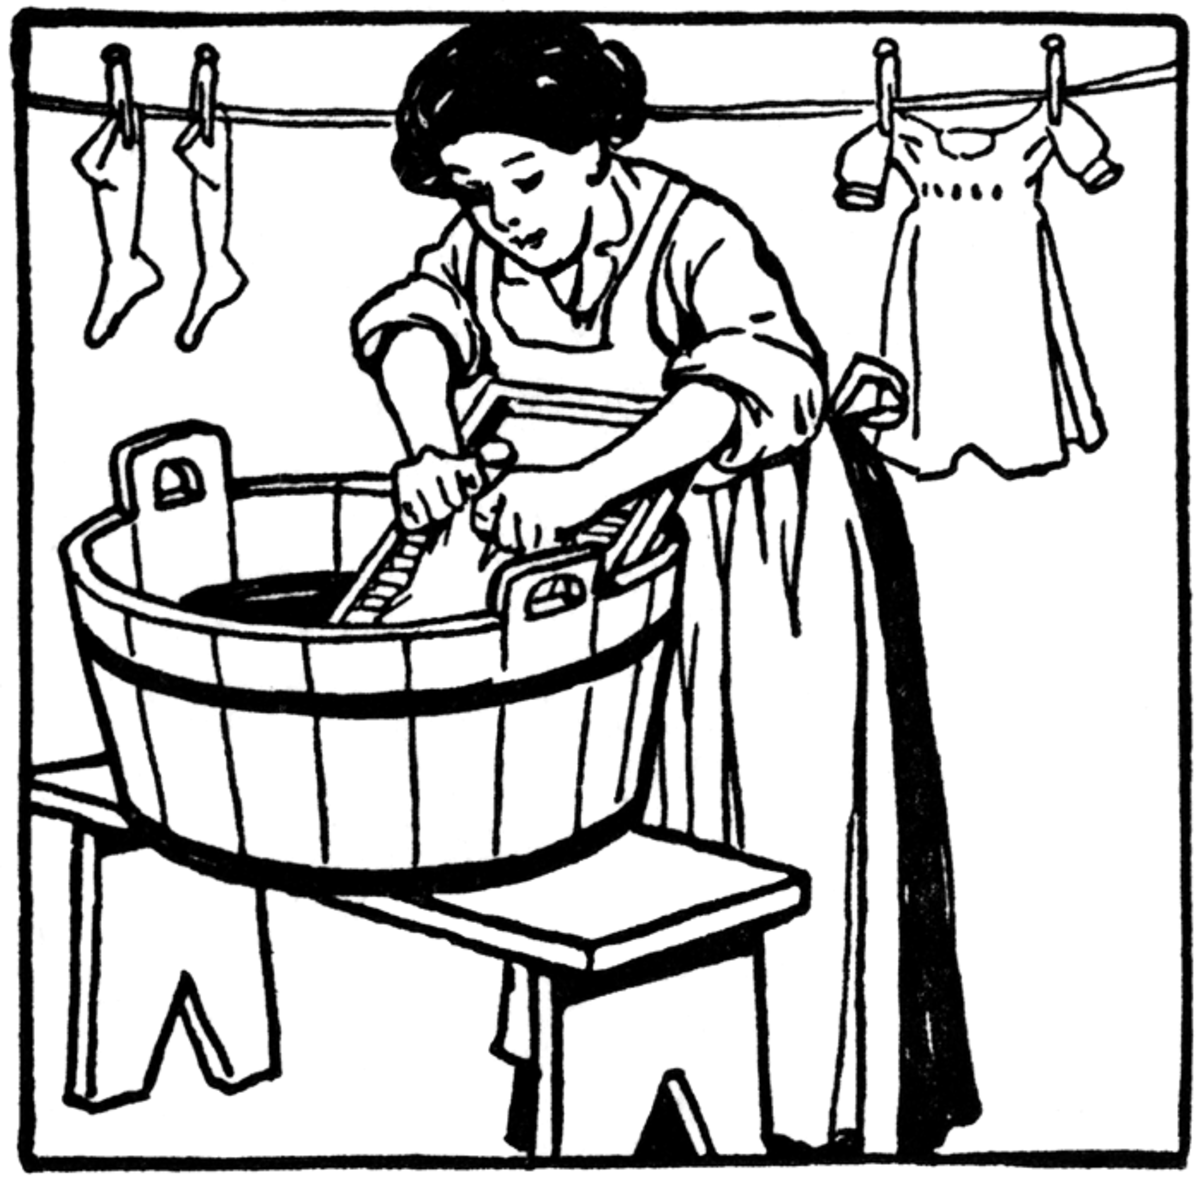 Old-fashioned hand wash laundry is till the best!